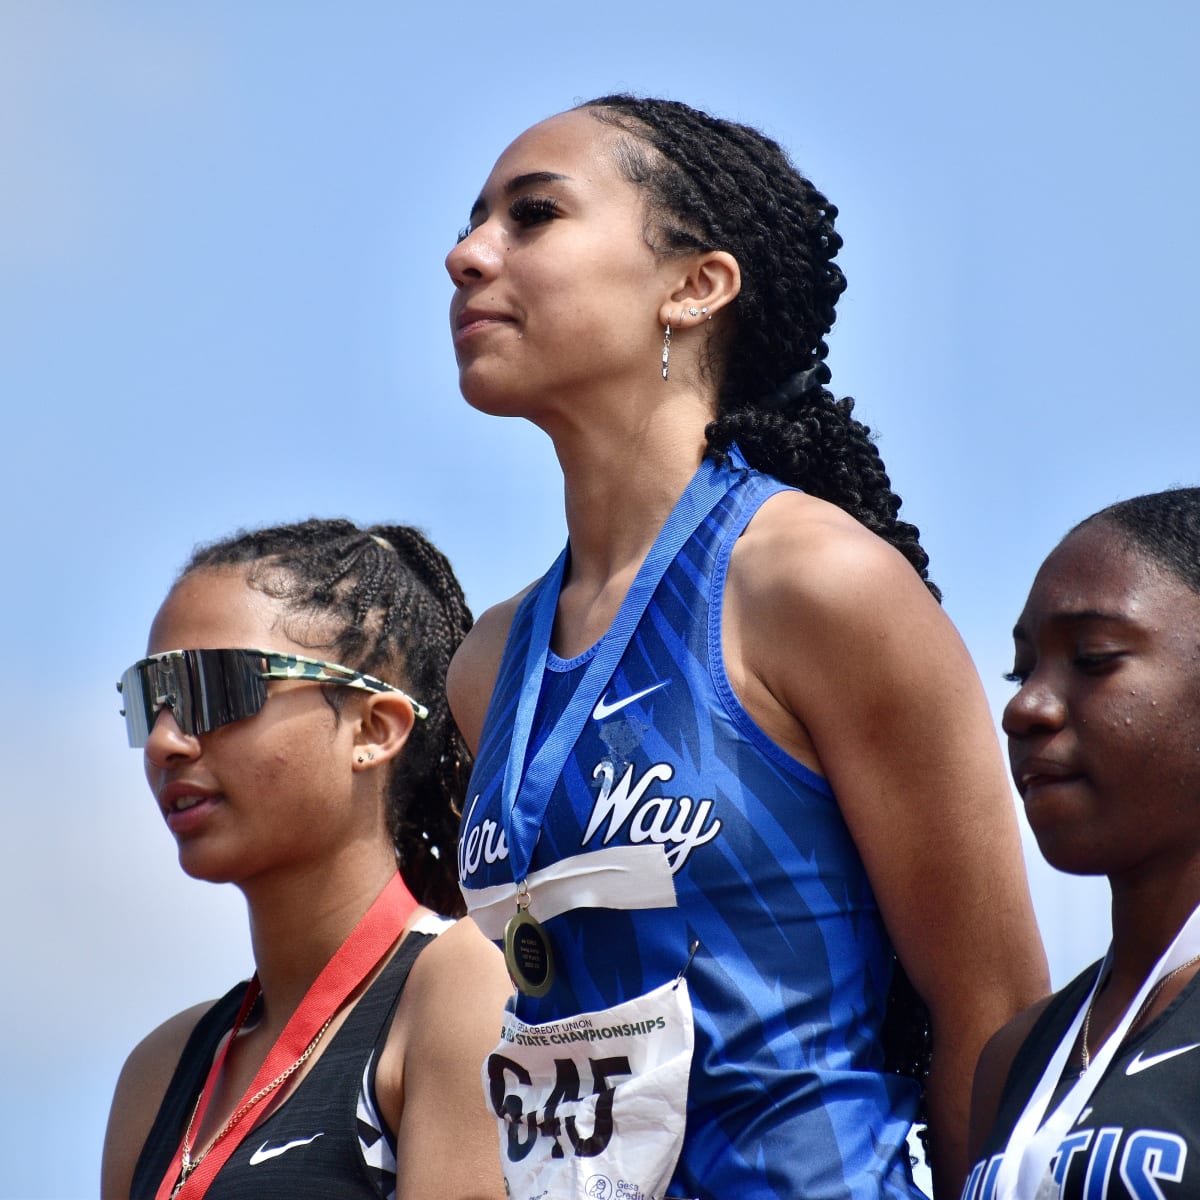 South Dakota high school state track and field results